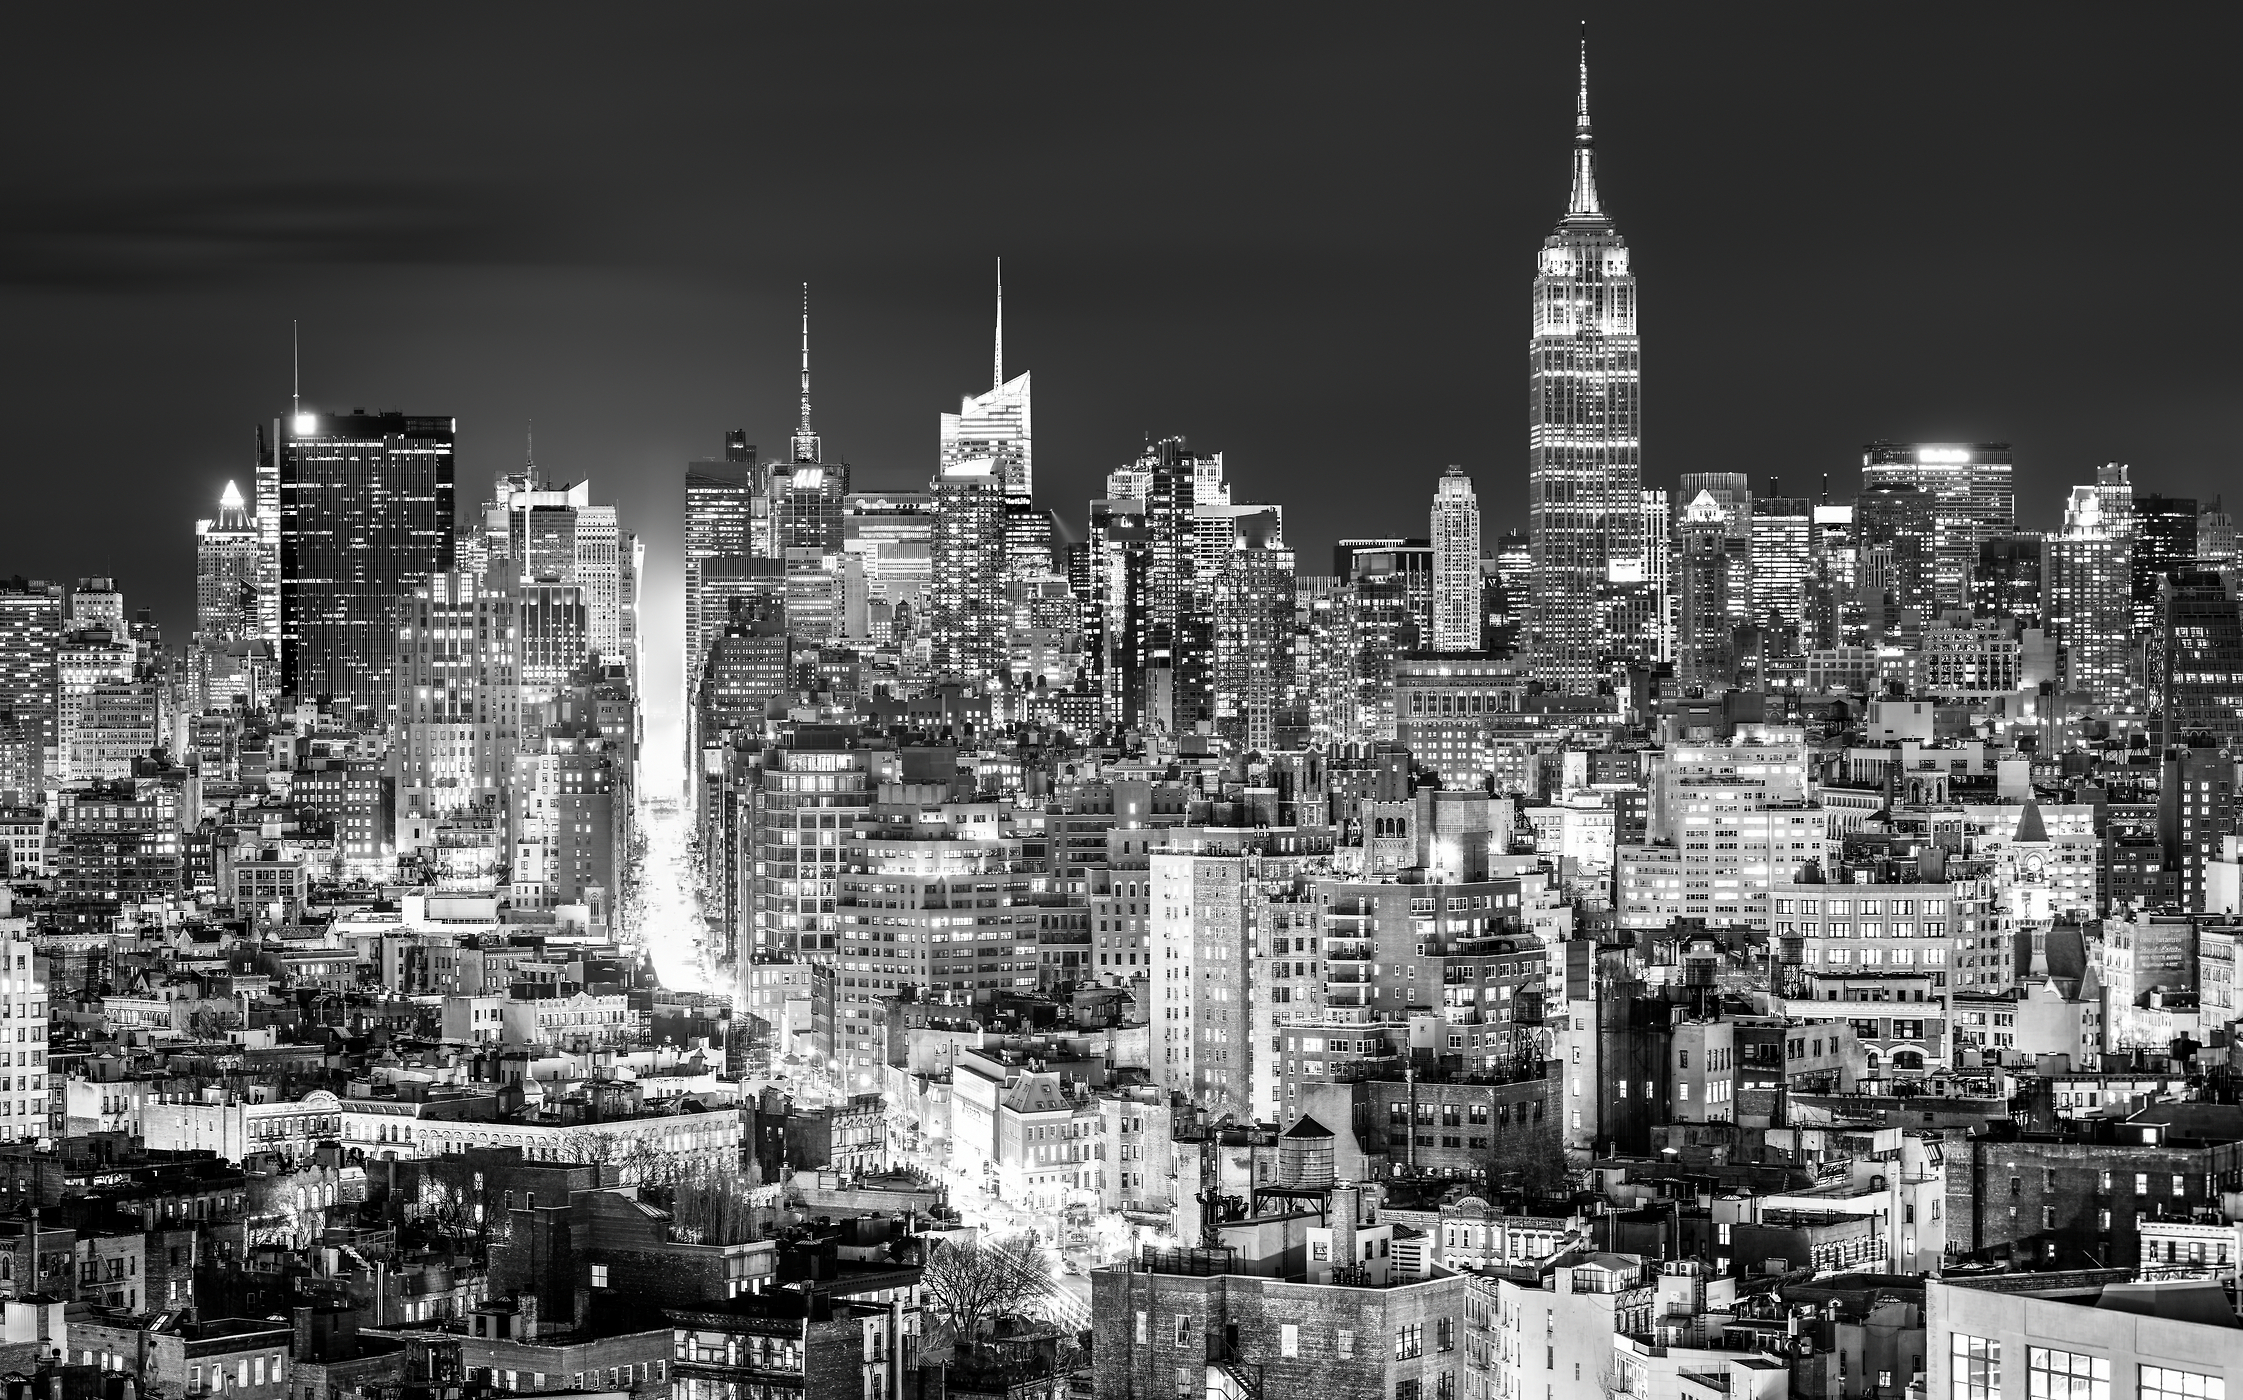 1,105 megapixels! A very high resolution, large-format VAST photo print of the Manhattan, New York City skyline at night; cityscape photo created by Dan Piech.